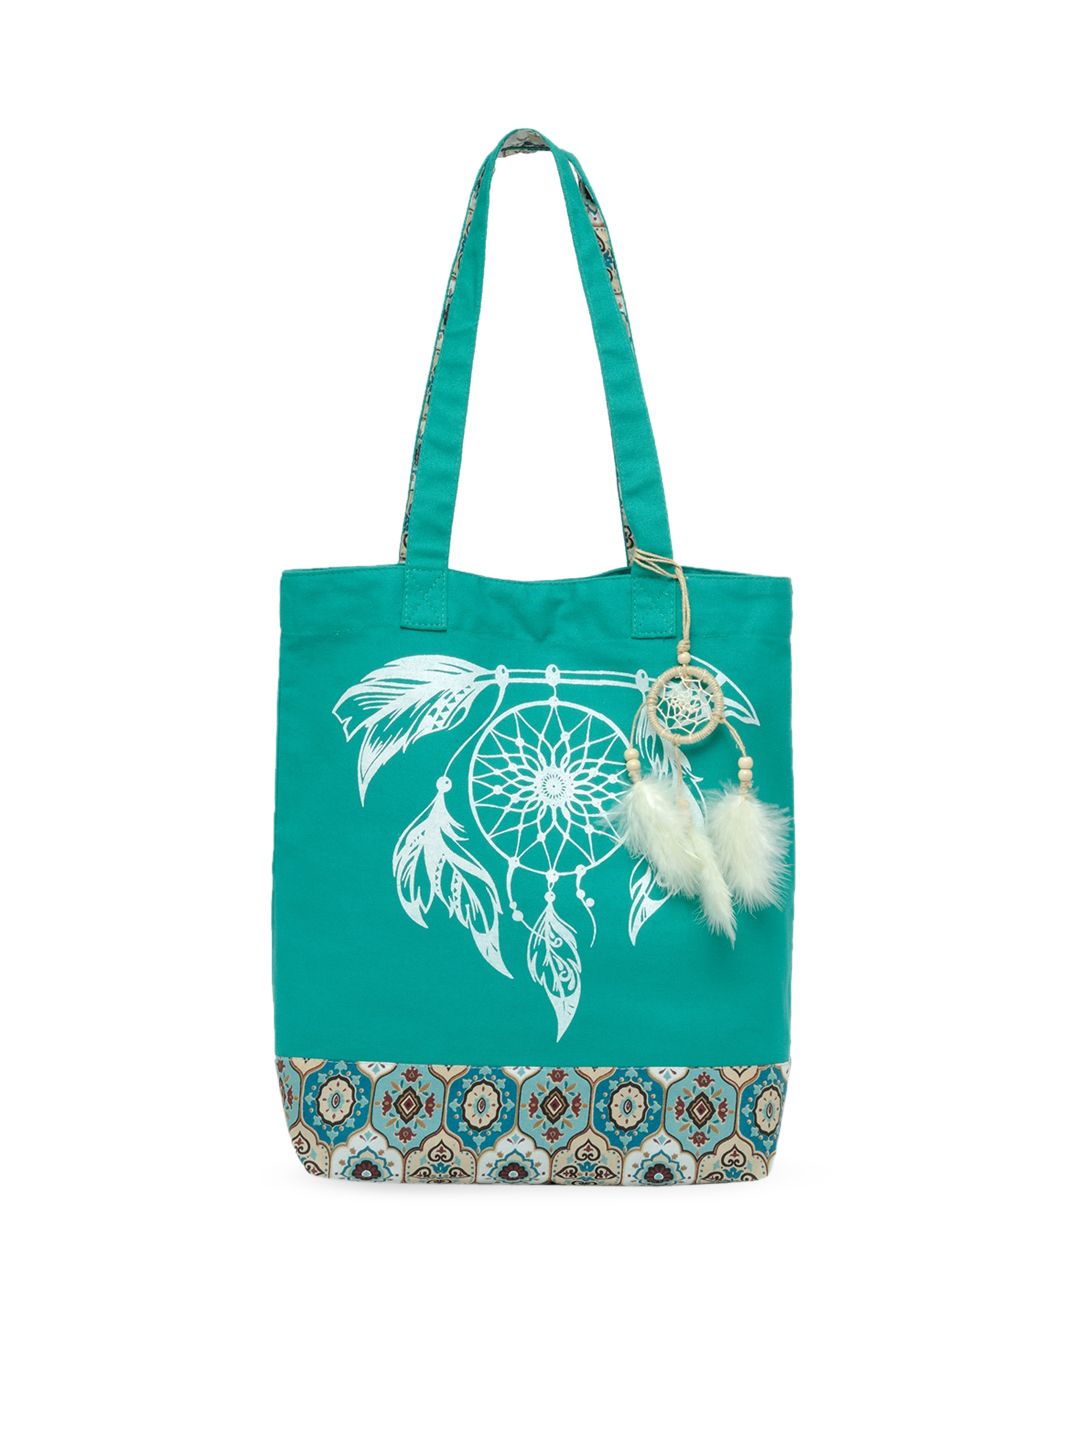 The House of Tara Teal and White Canvas Tribal Motif Printed Shopper Tote Bag Price in India